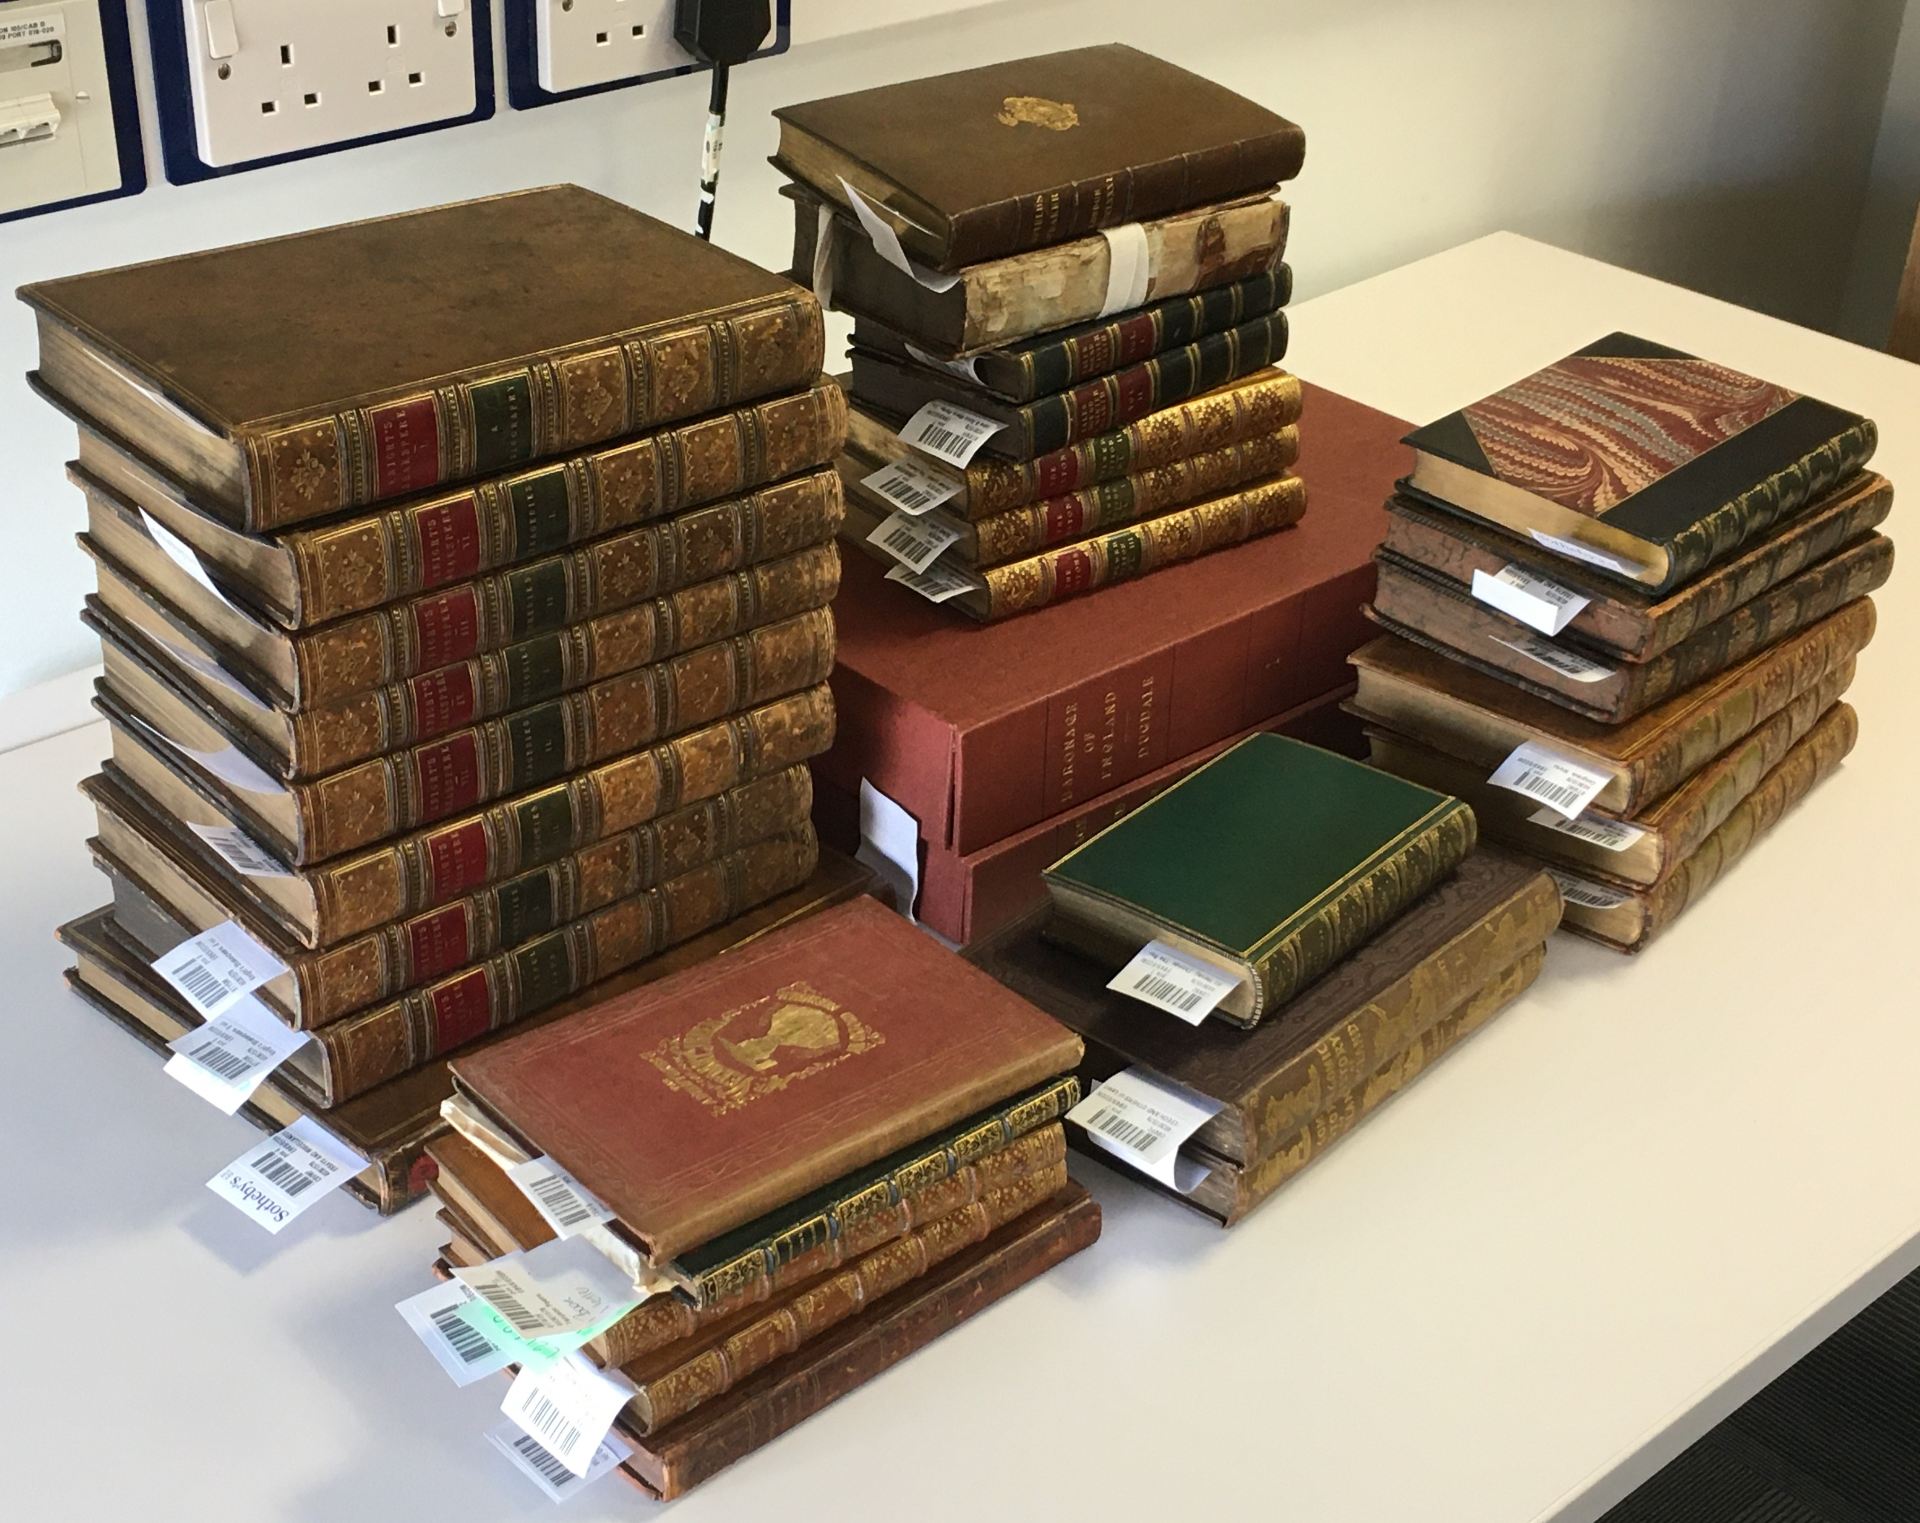 Honresfield books donated to the Arts and Social Sciences Library, University of Bristol.